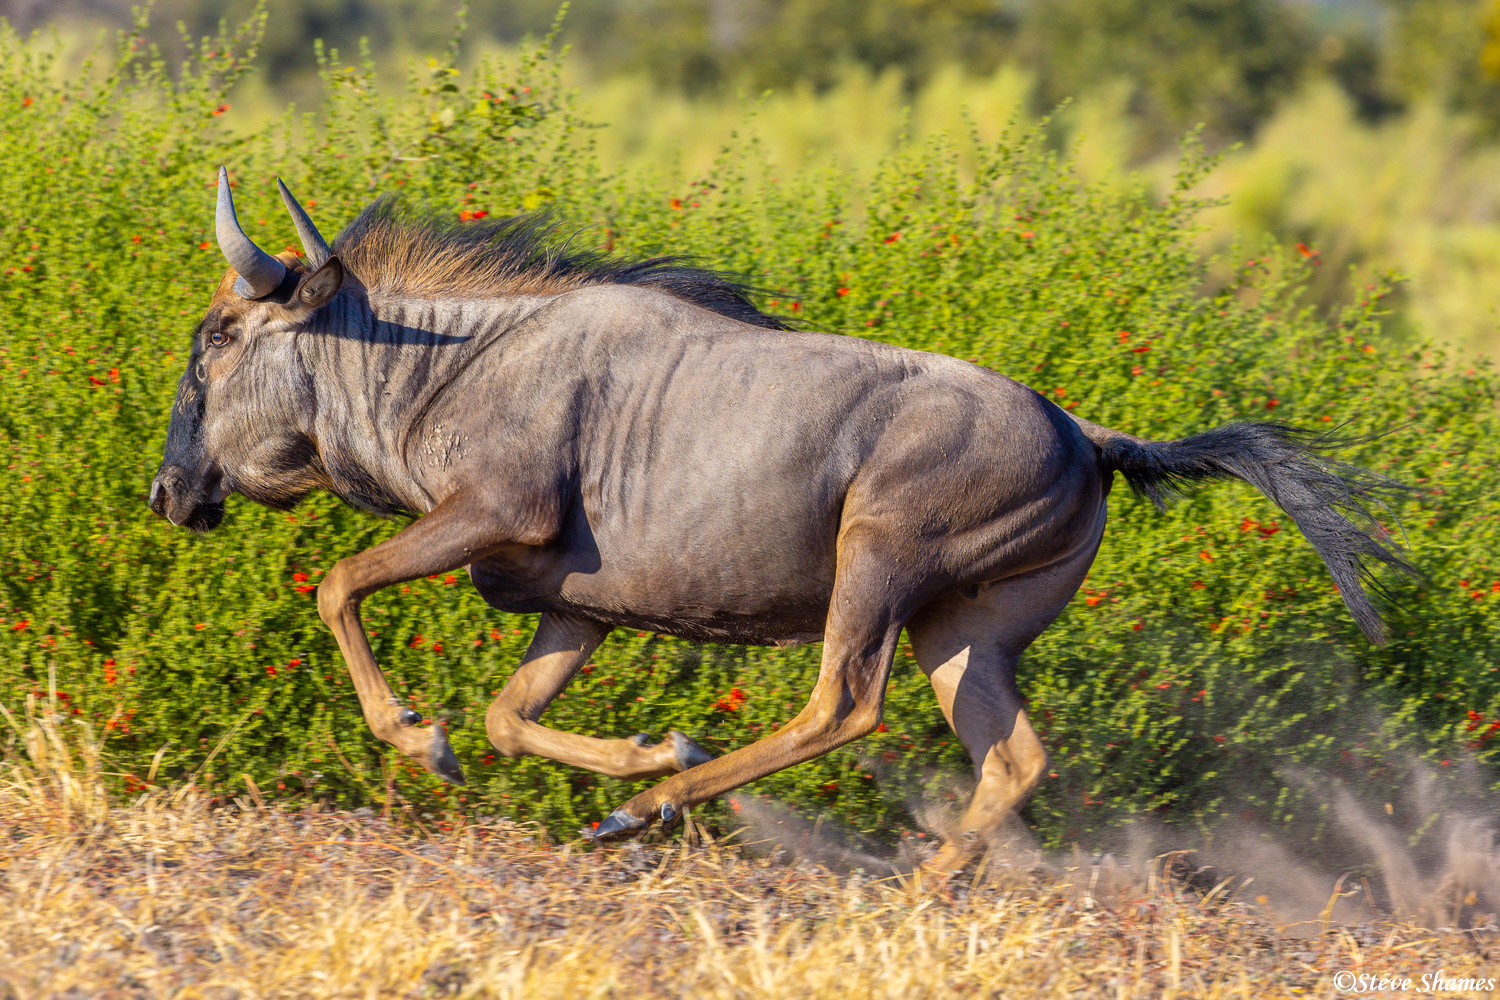 Botswana wildebeest on the move, in a full gallop.